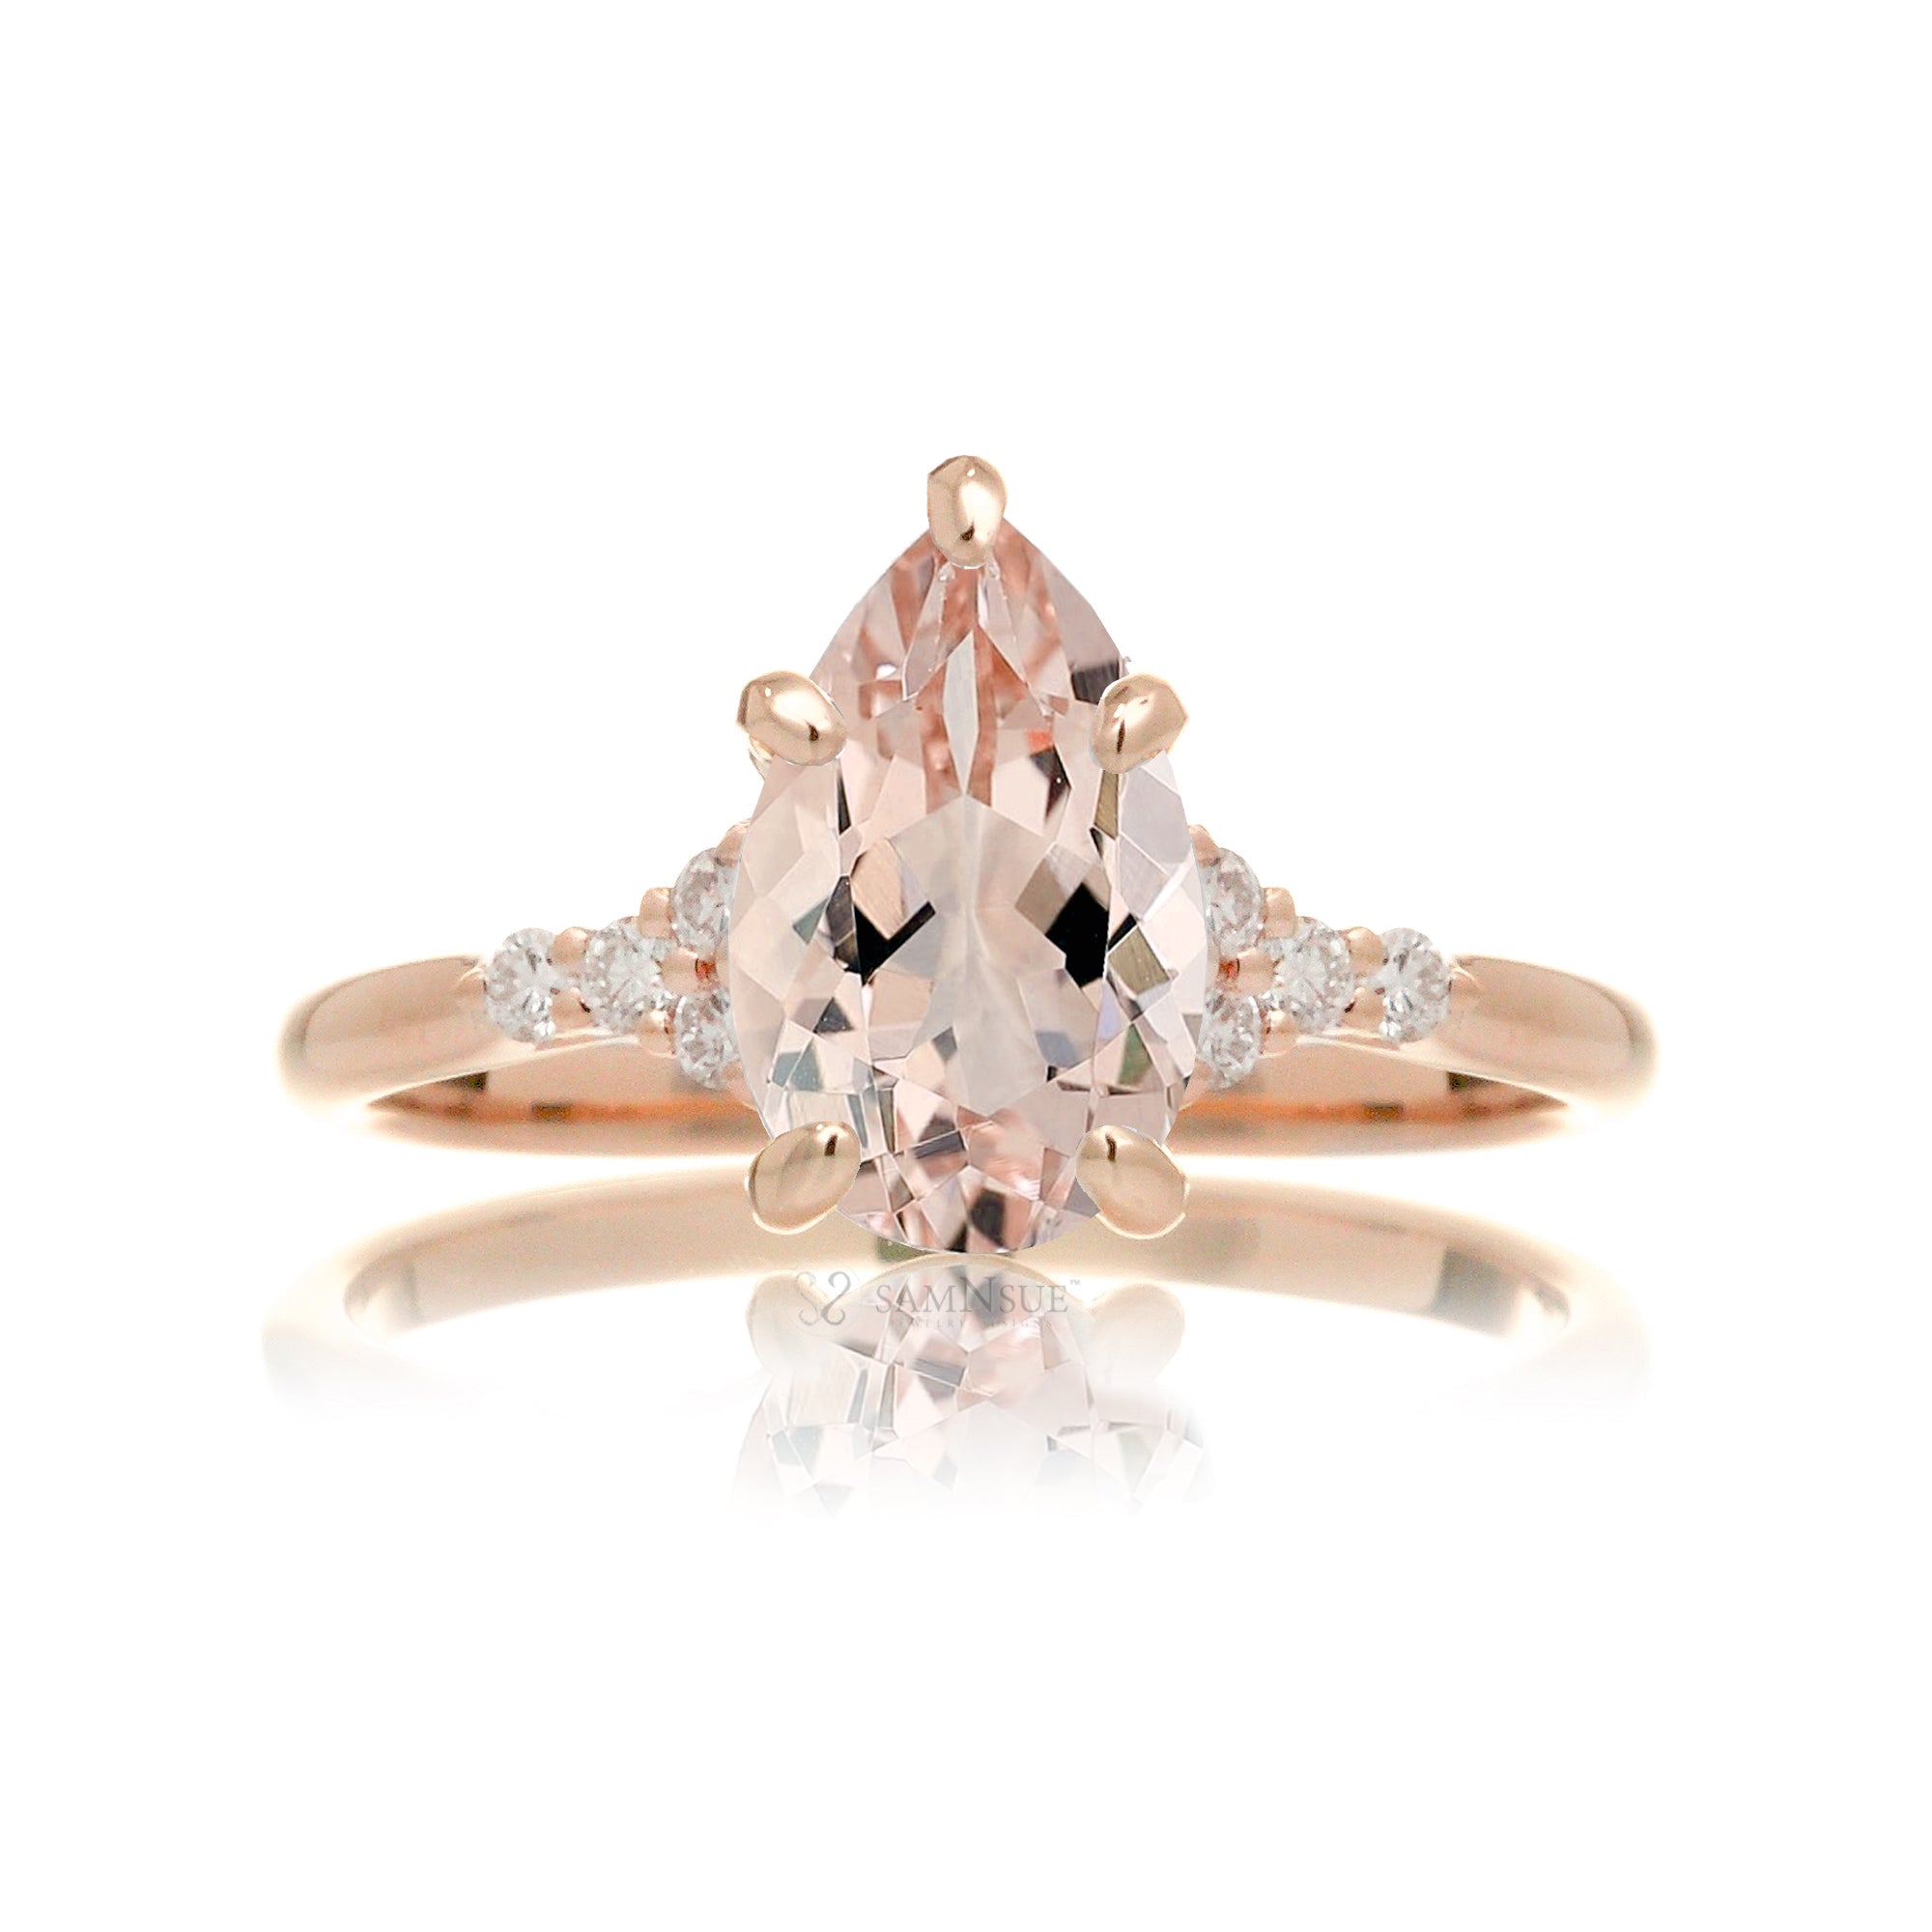 Pear cut natural morganite and diamond engagement ring in rose gold - the Chloe